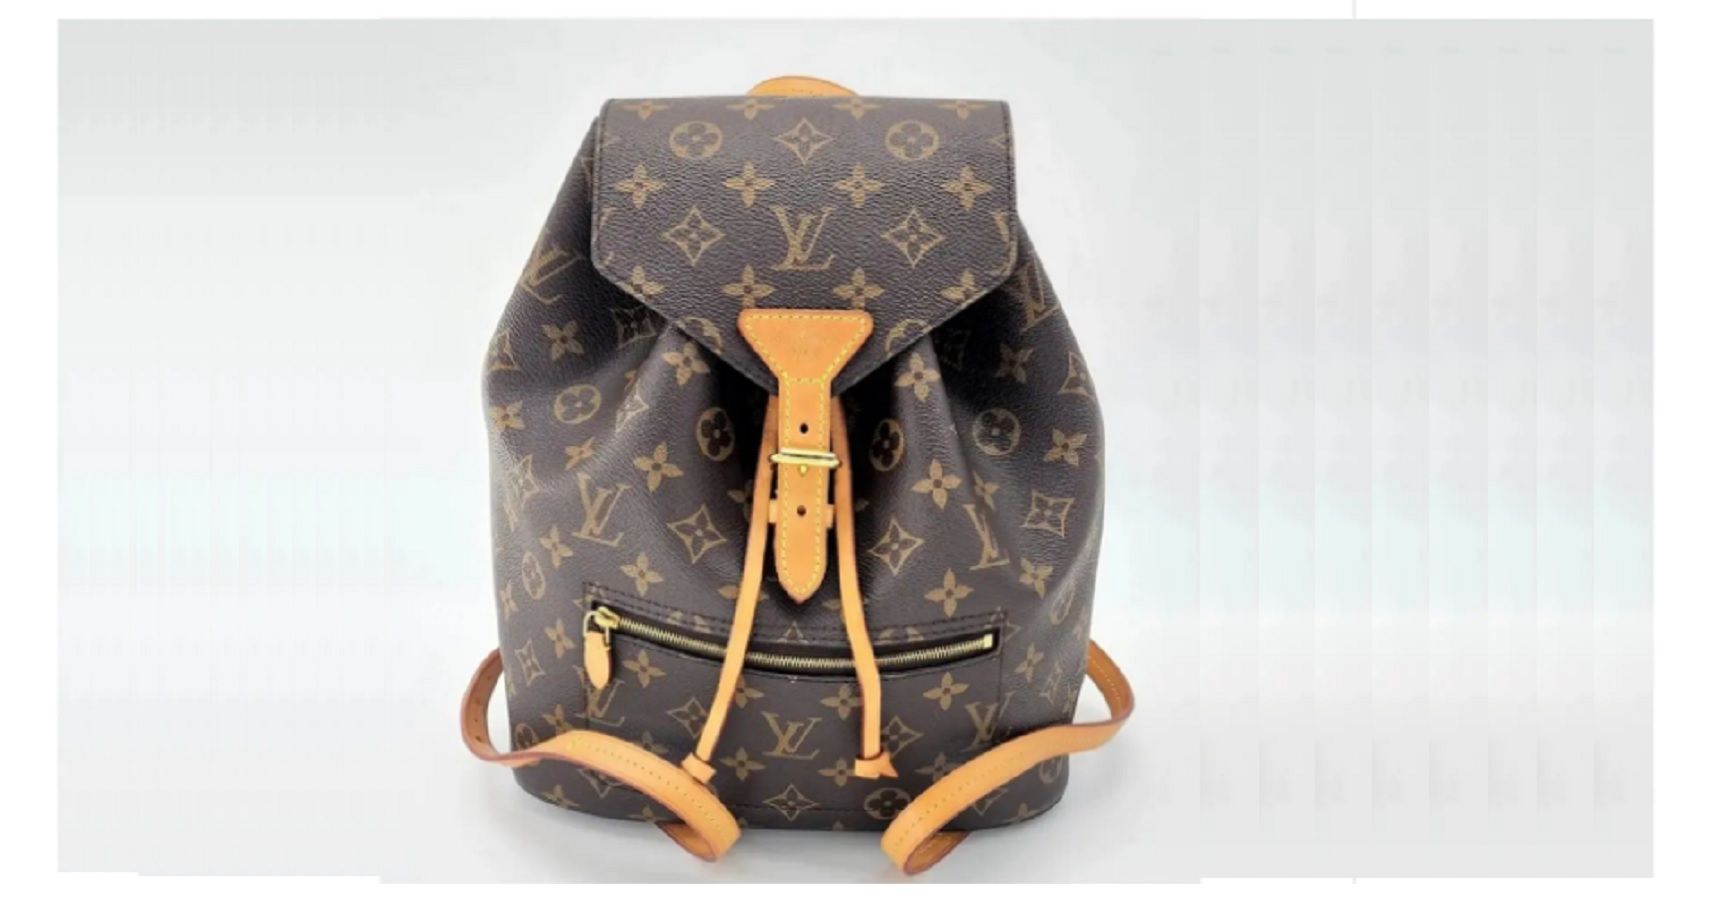 vuitton most expensive backpack